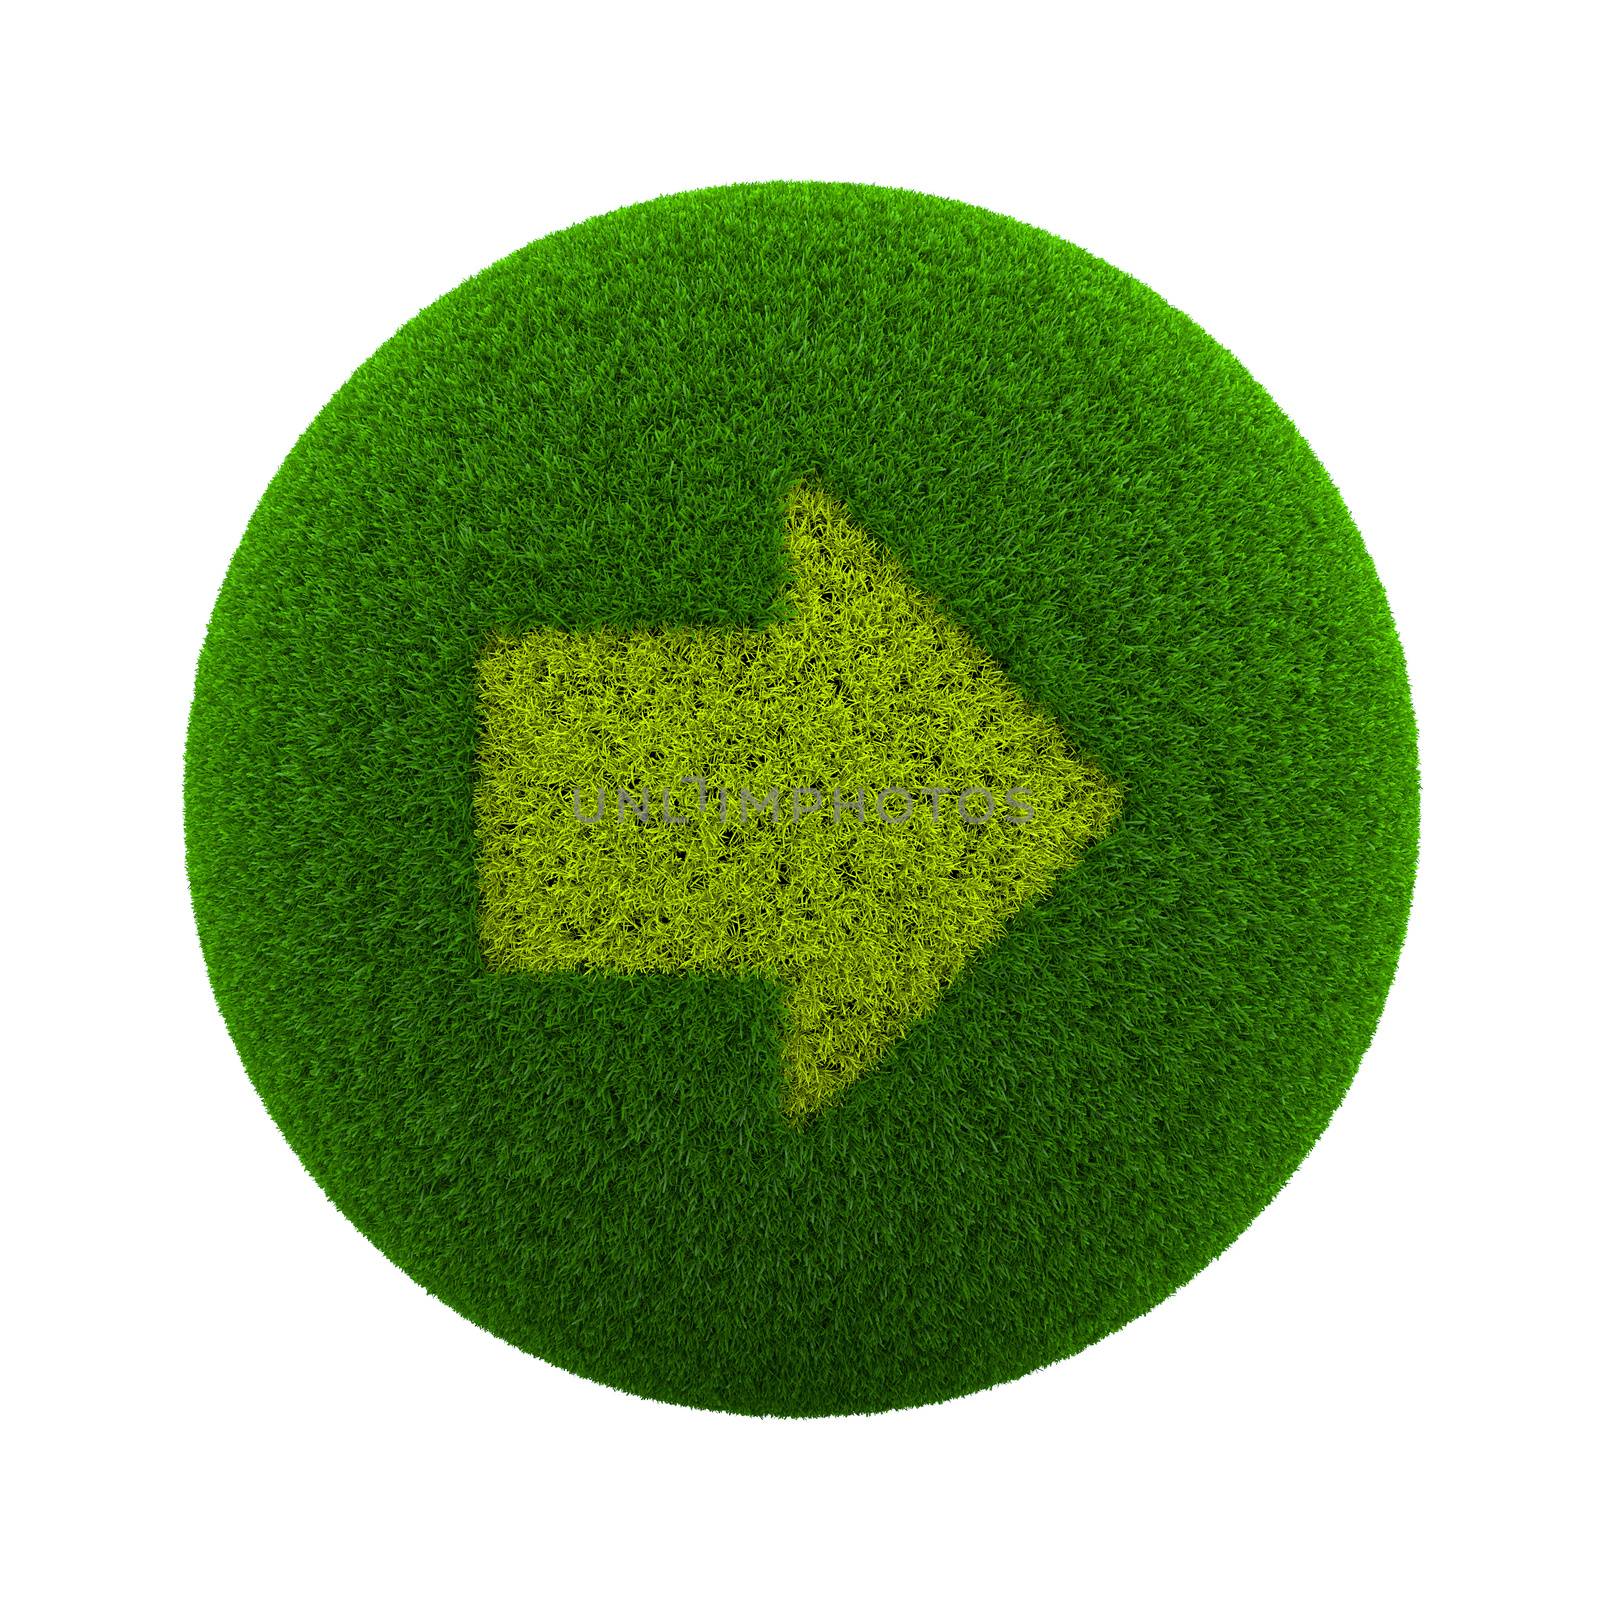 Green Globe with Grass Cutted in the Shape of a Right Arrow Symbol 3D Illustration Isolated on White Background